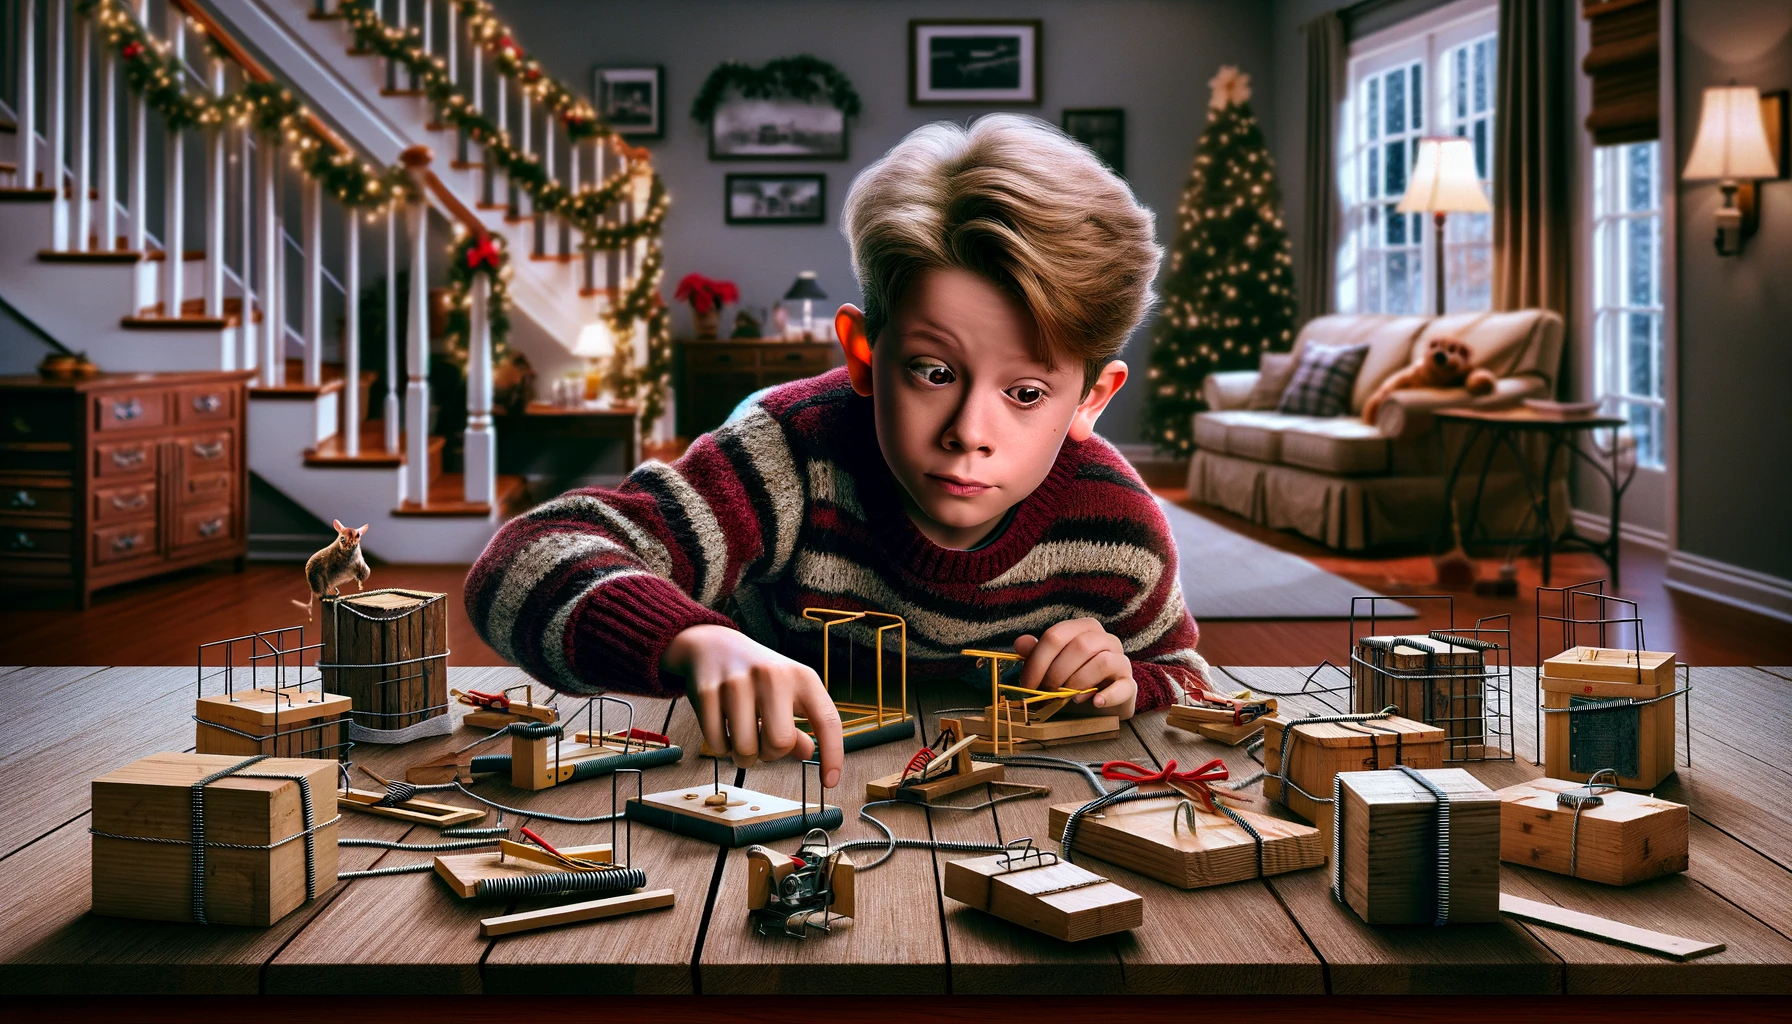 dall_e_2023-12-23_18_07_40_a_photo-realistic_image_of_a_young_boy_ingeniously_setting_up_traps_in_a_house_to_thwart_burglars_inspired_by_the_movie_home_alone_the_scene_shows.png